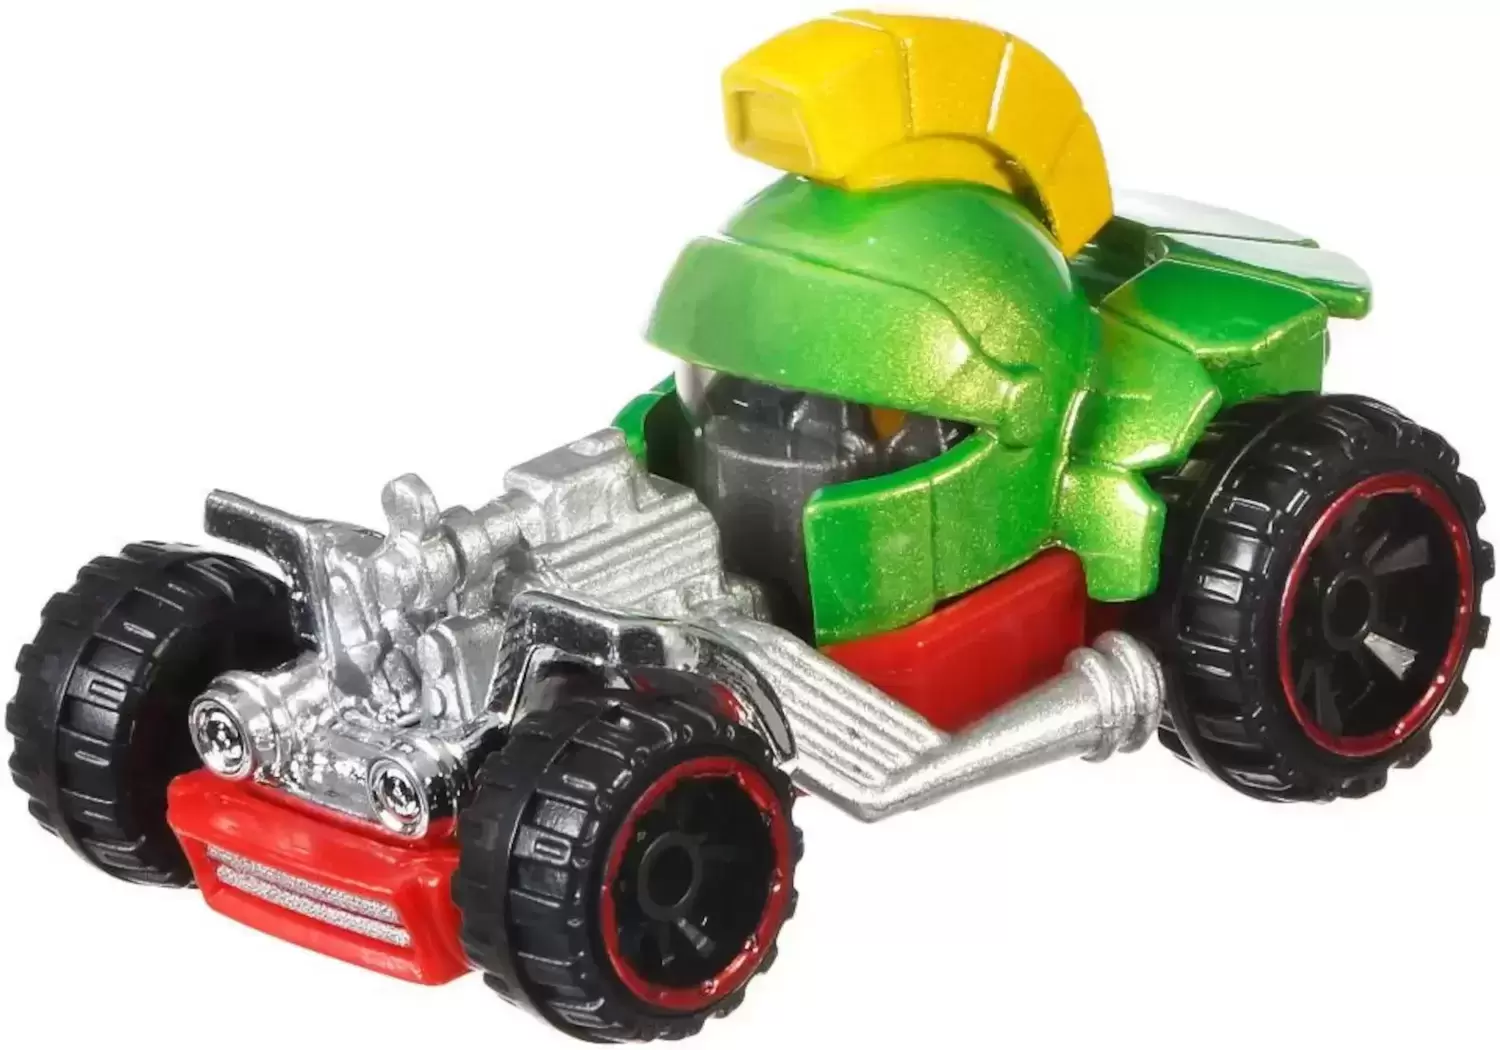 Hot Wheels Looney Tunes Character Cars - Marvin The Martian